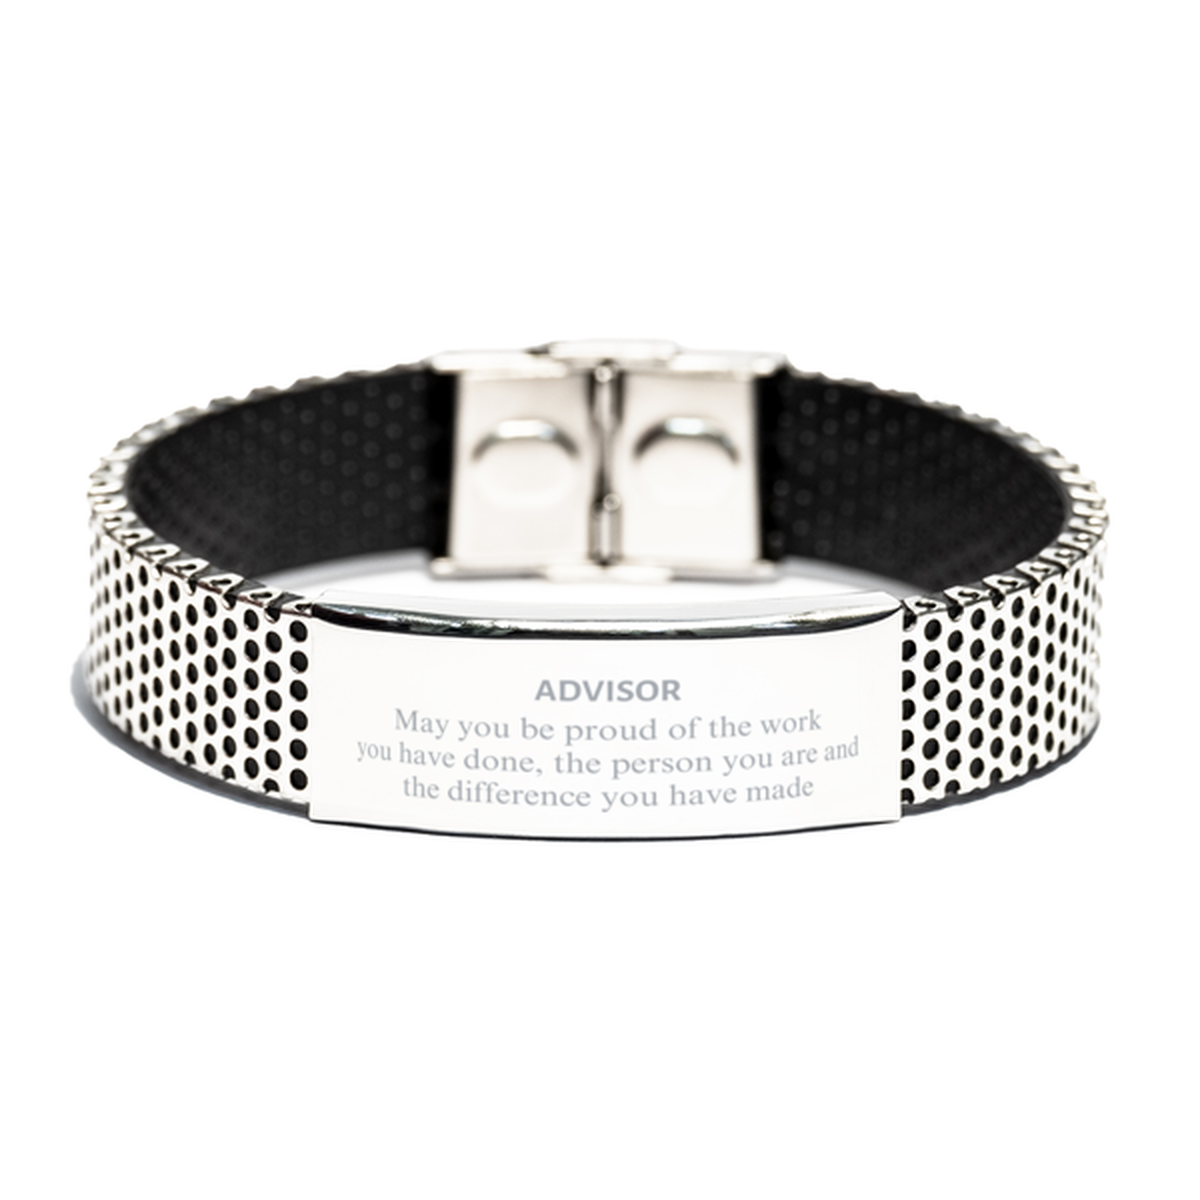 Advisor May you be proud of the work you have done, Retirement Advisor Stainless Steel Bracelet for Colleague Appreciation Gifts Amazing for Advisor